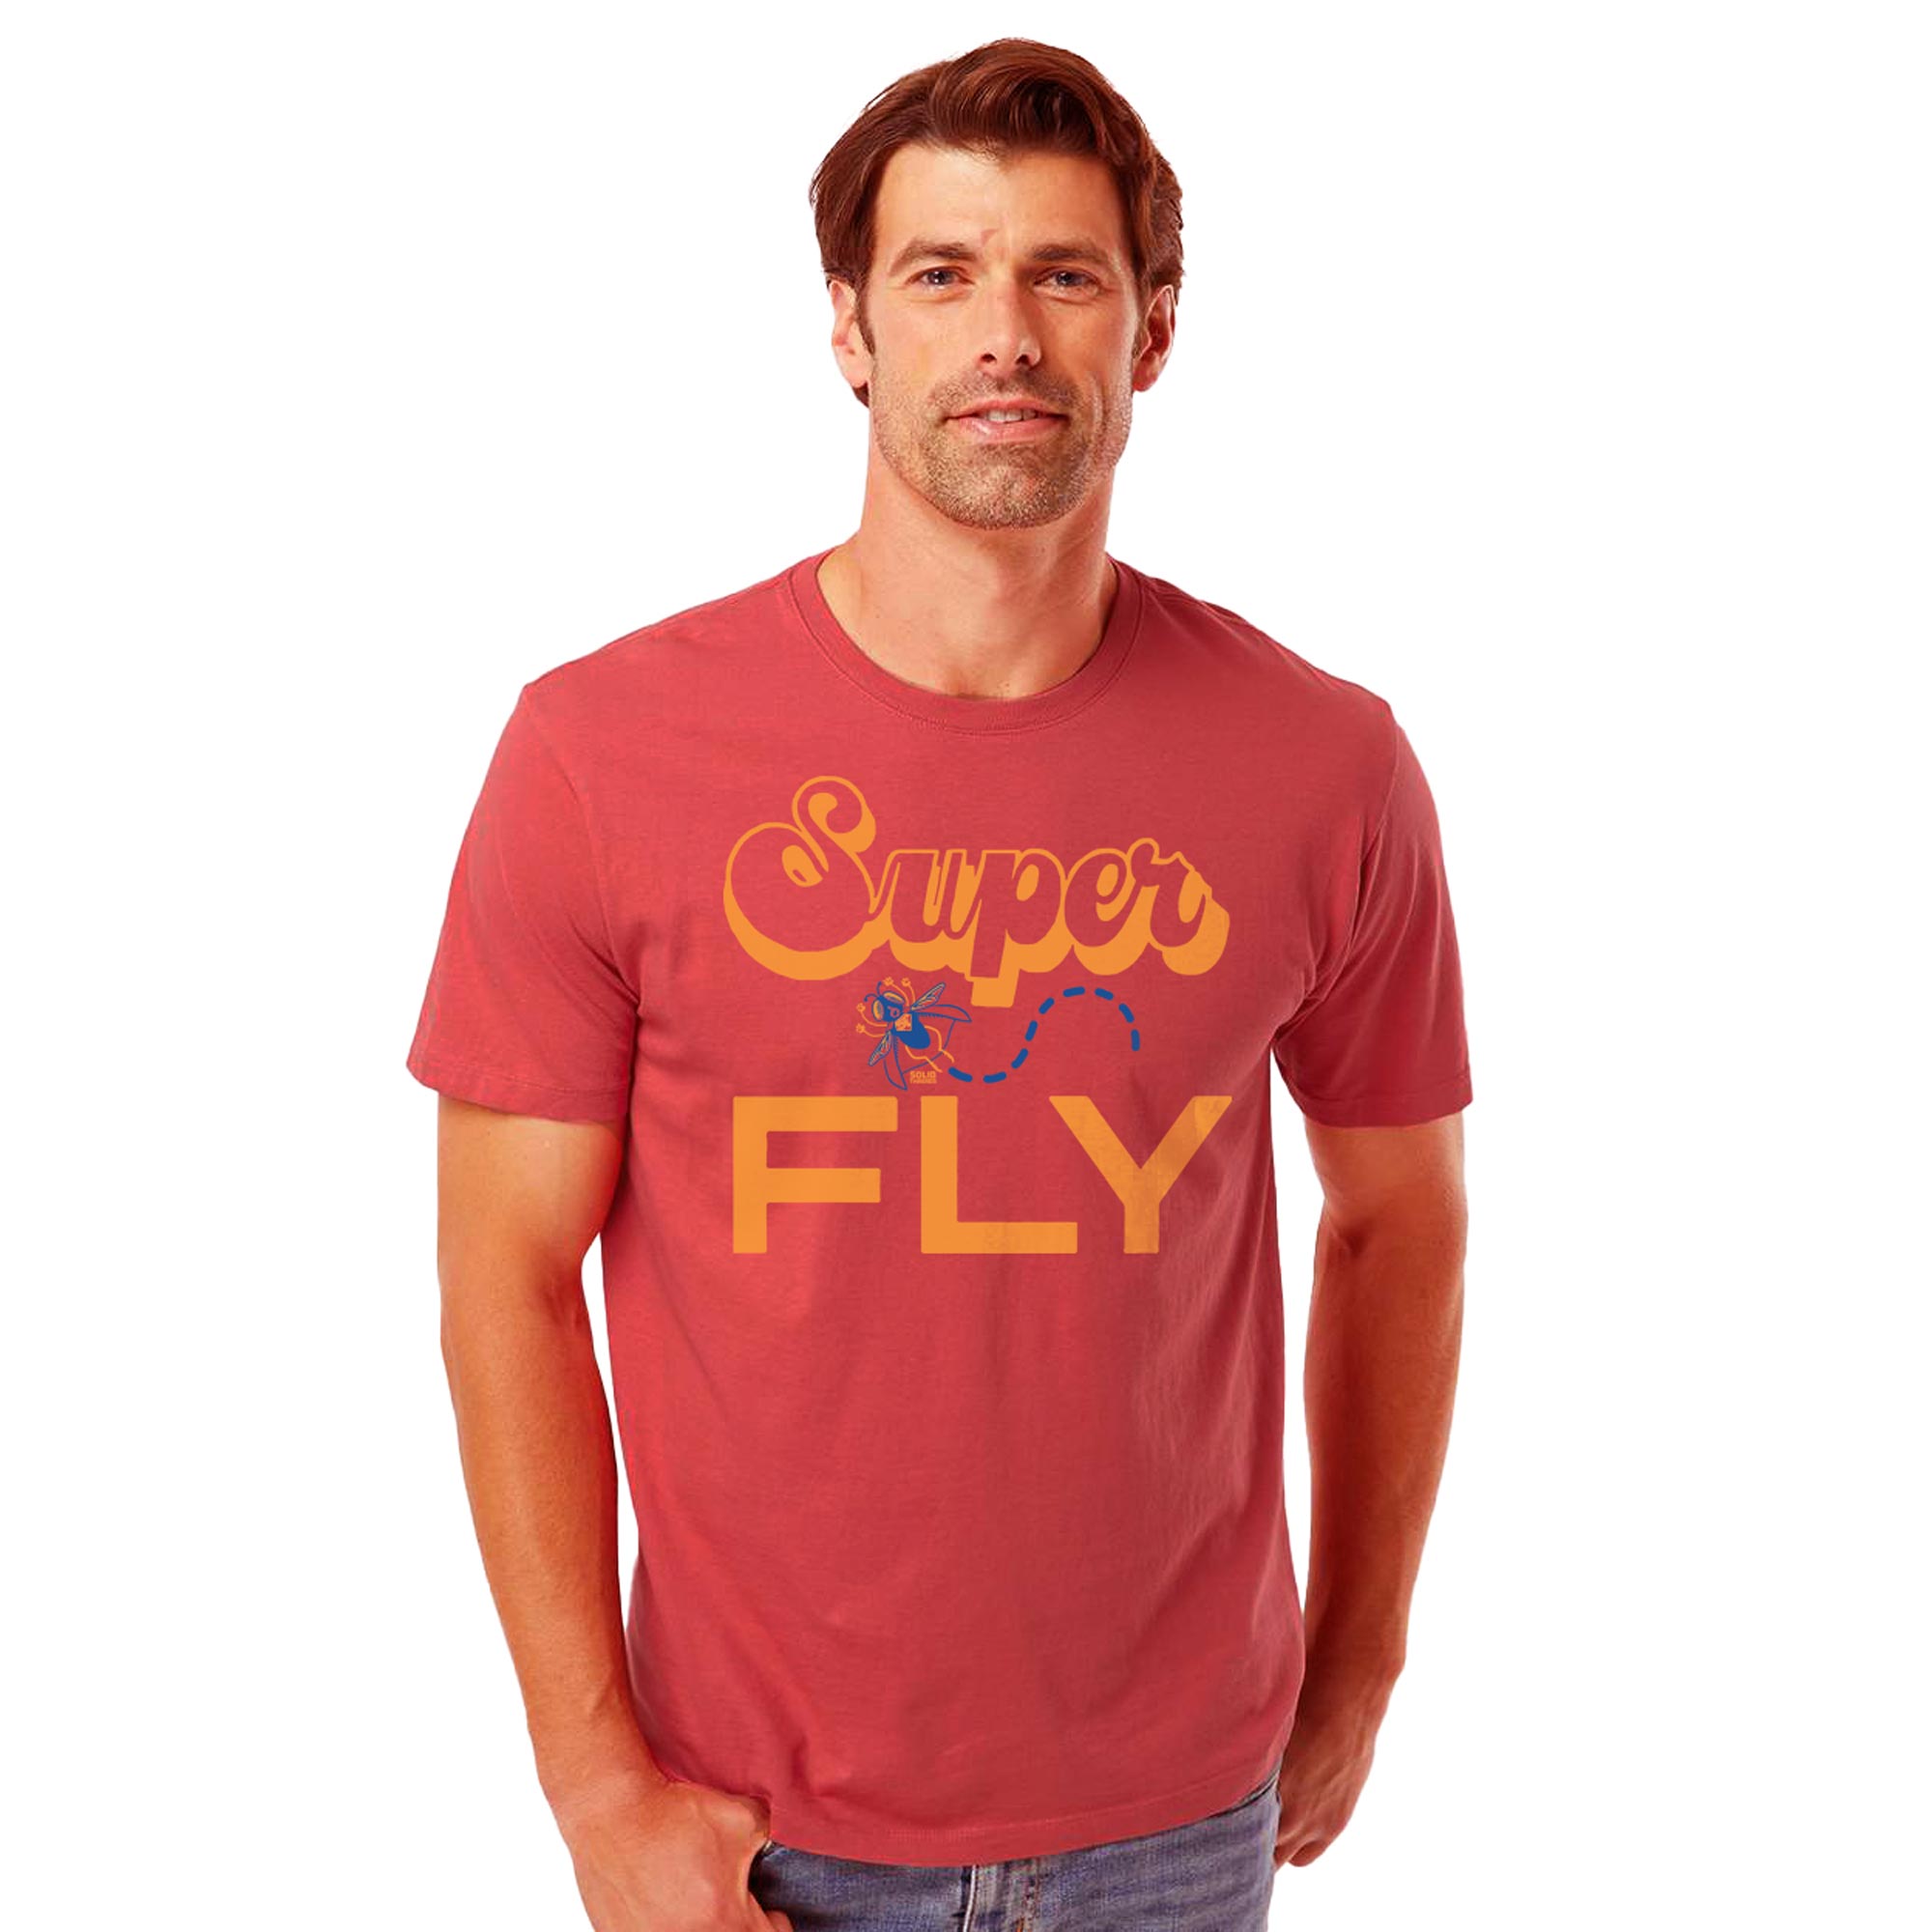 Superfly Vintage Organic Cotton T-shirt | Funny Curtis Mayfield  Tee | Solid Threads